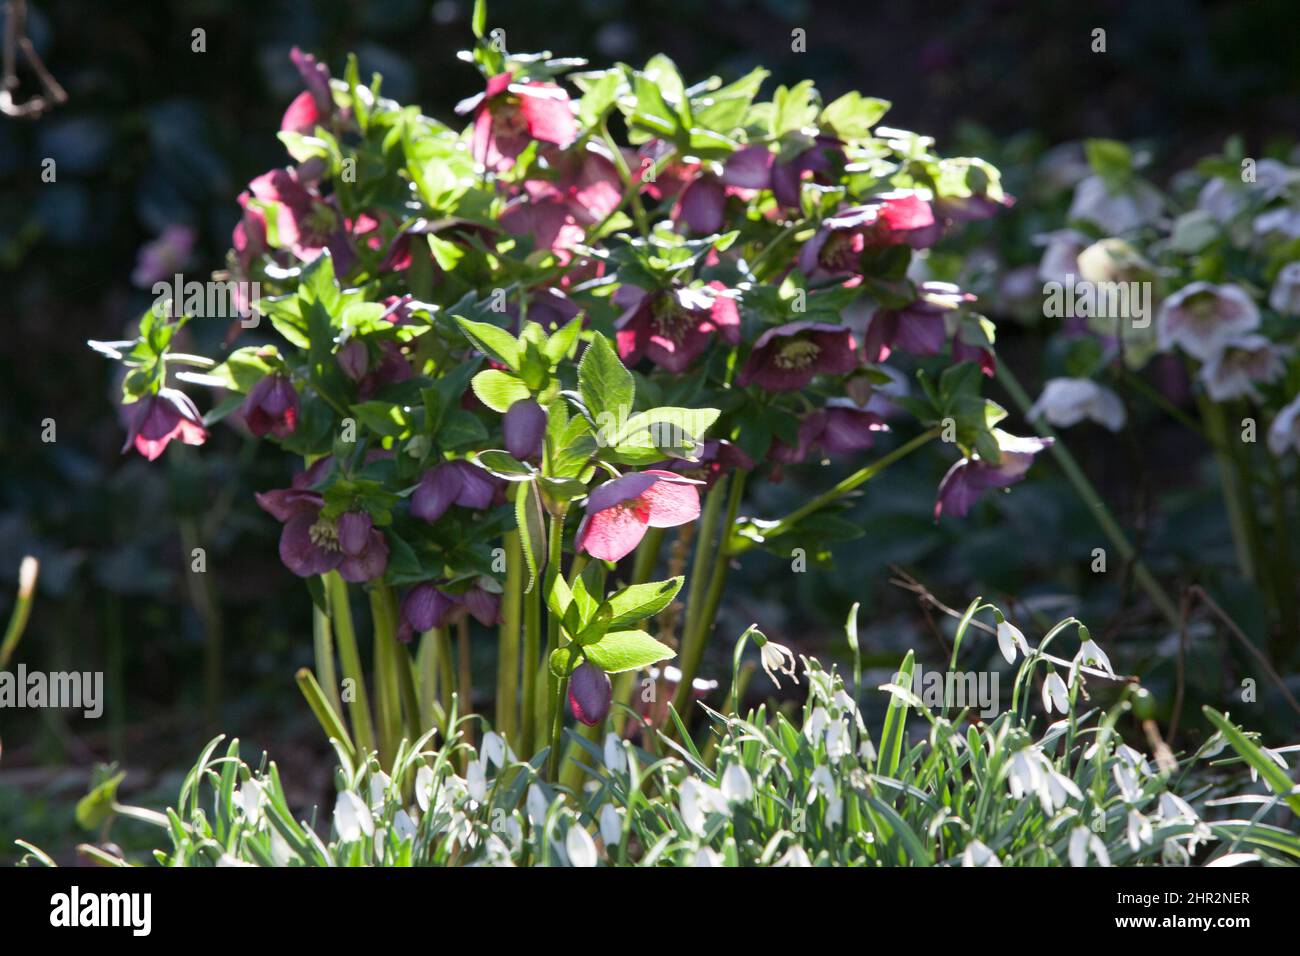 Sunny but cold weather in February, winter flowers illuminated in a London garden. Snowdrops and hellebores give interest to a late winter flowerbed. Stock Photo